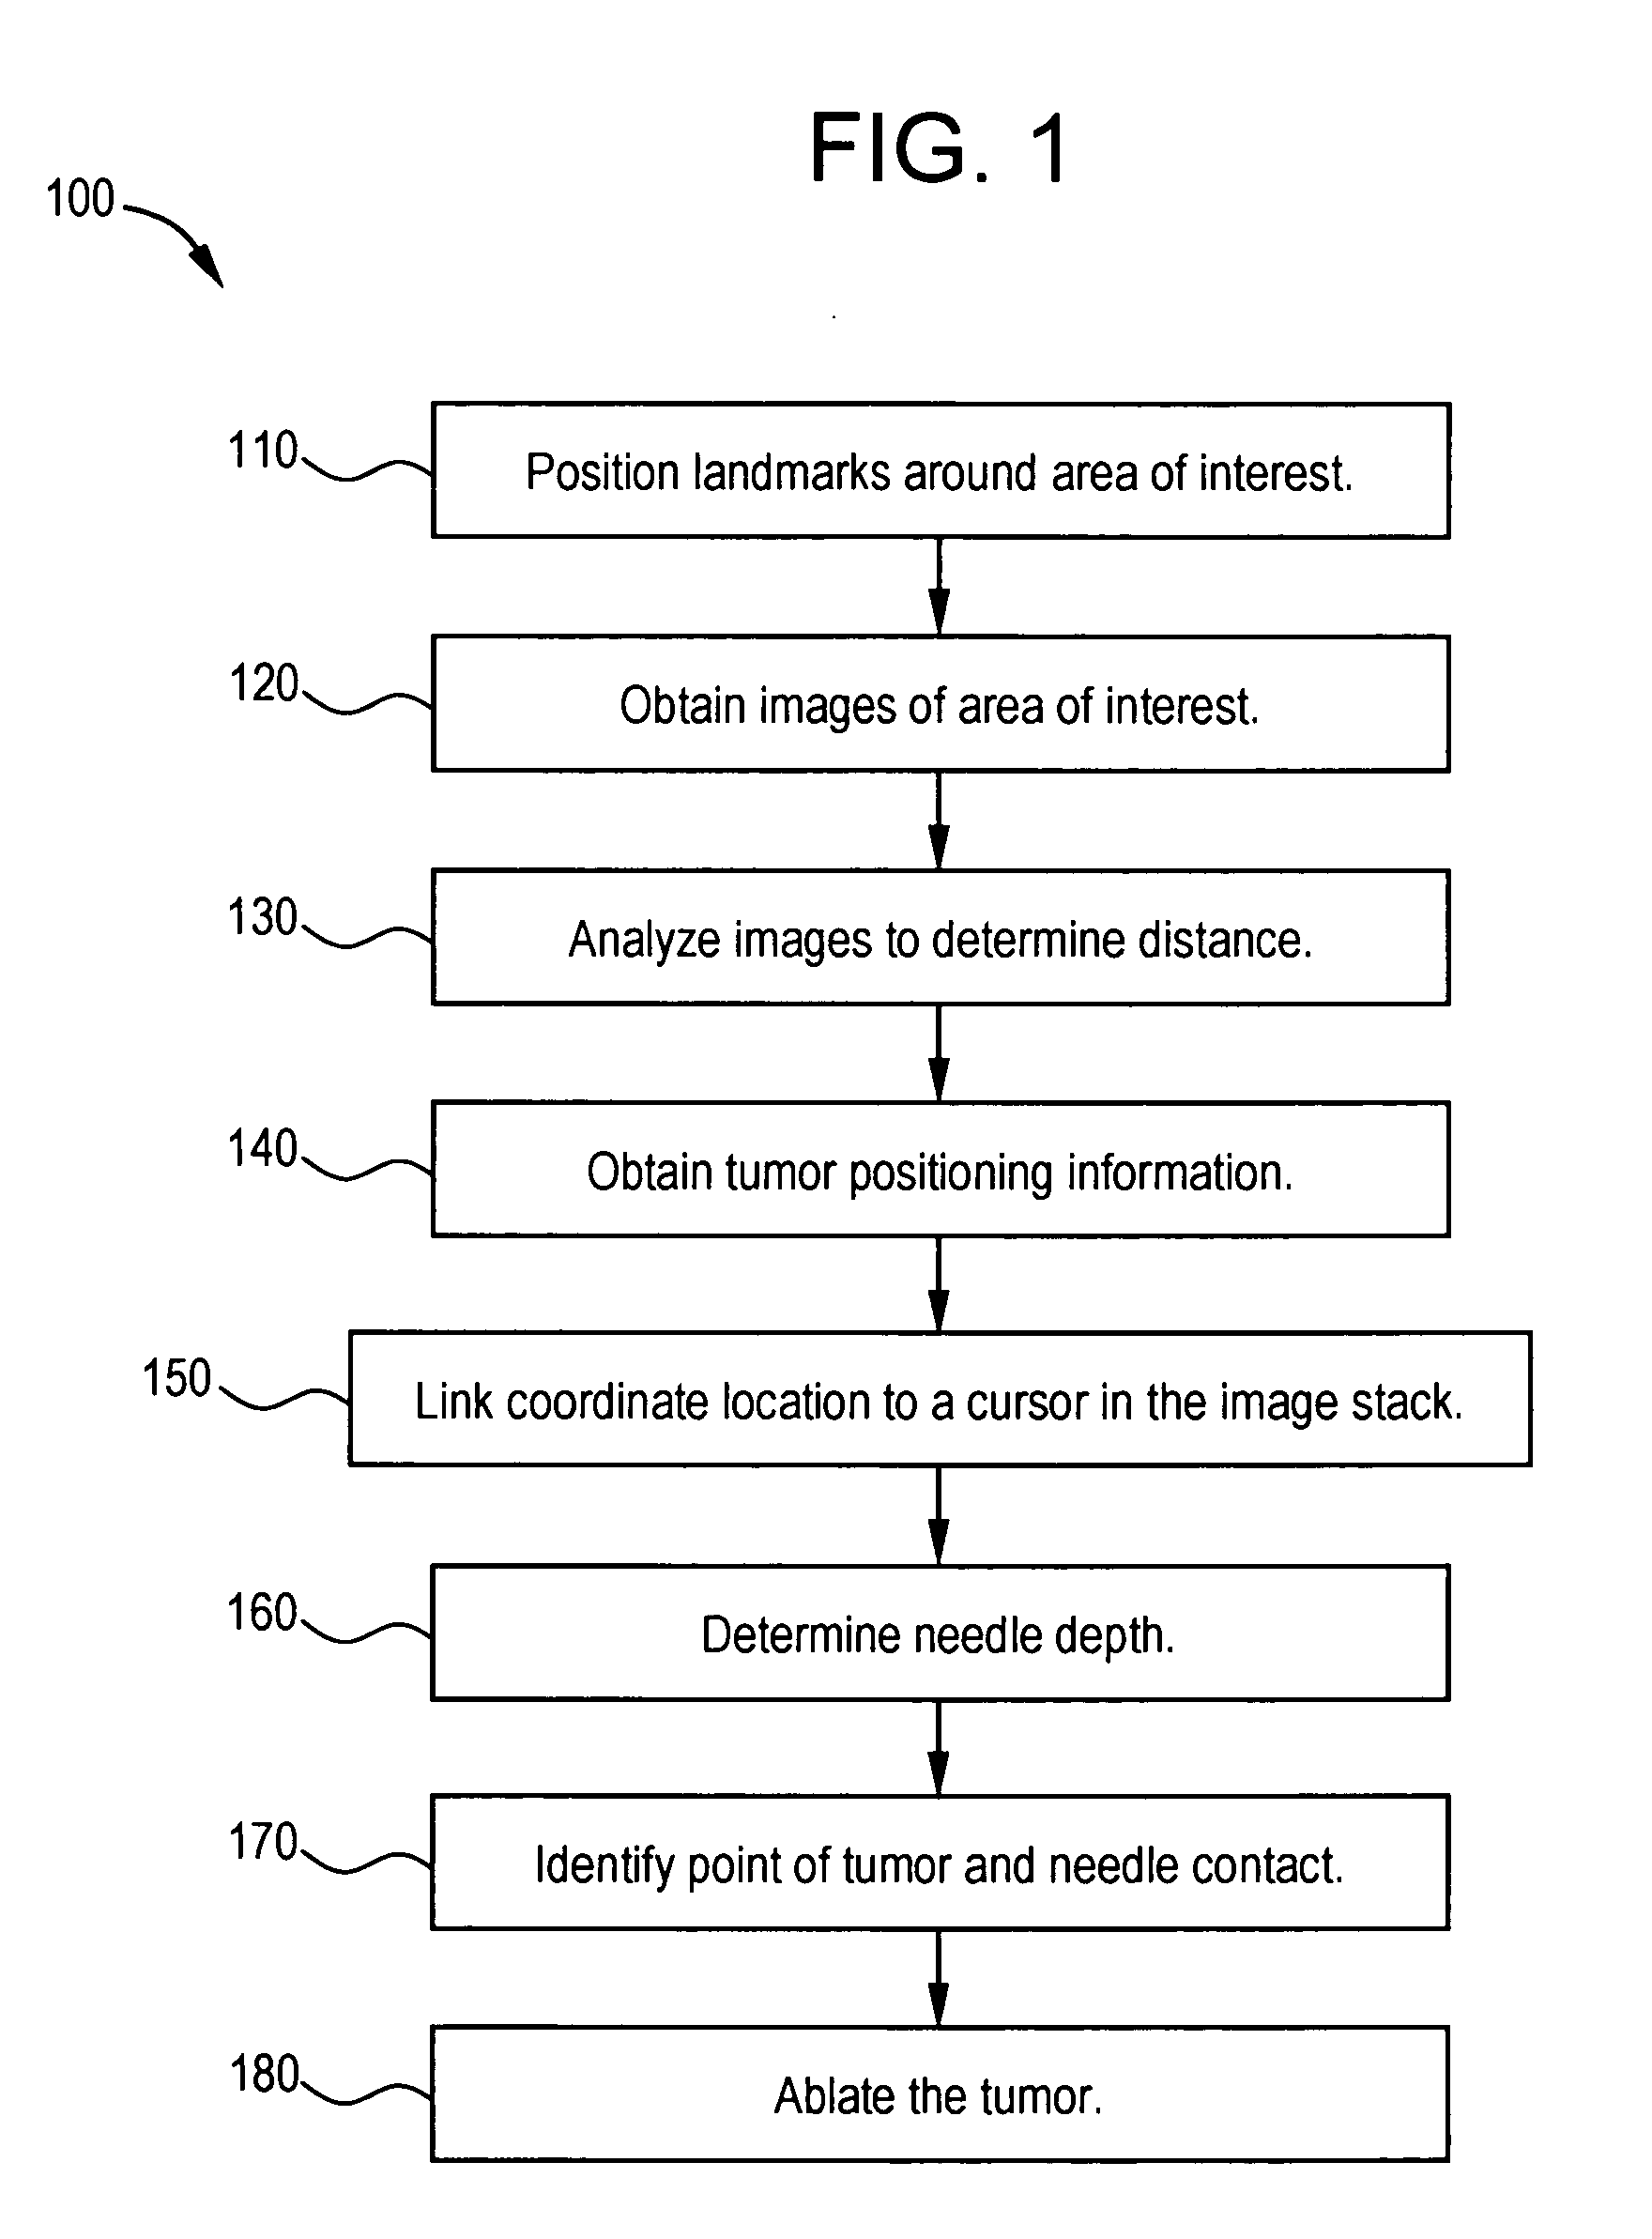 System and method for improved ablation of tumors